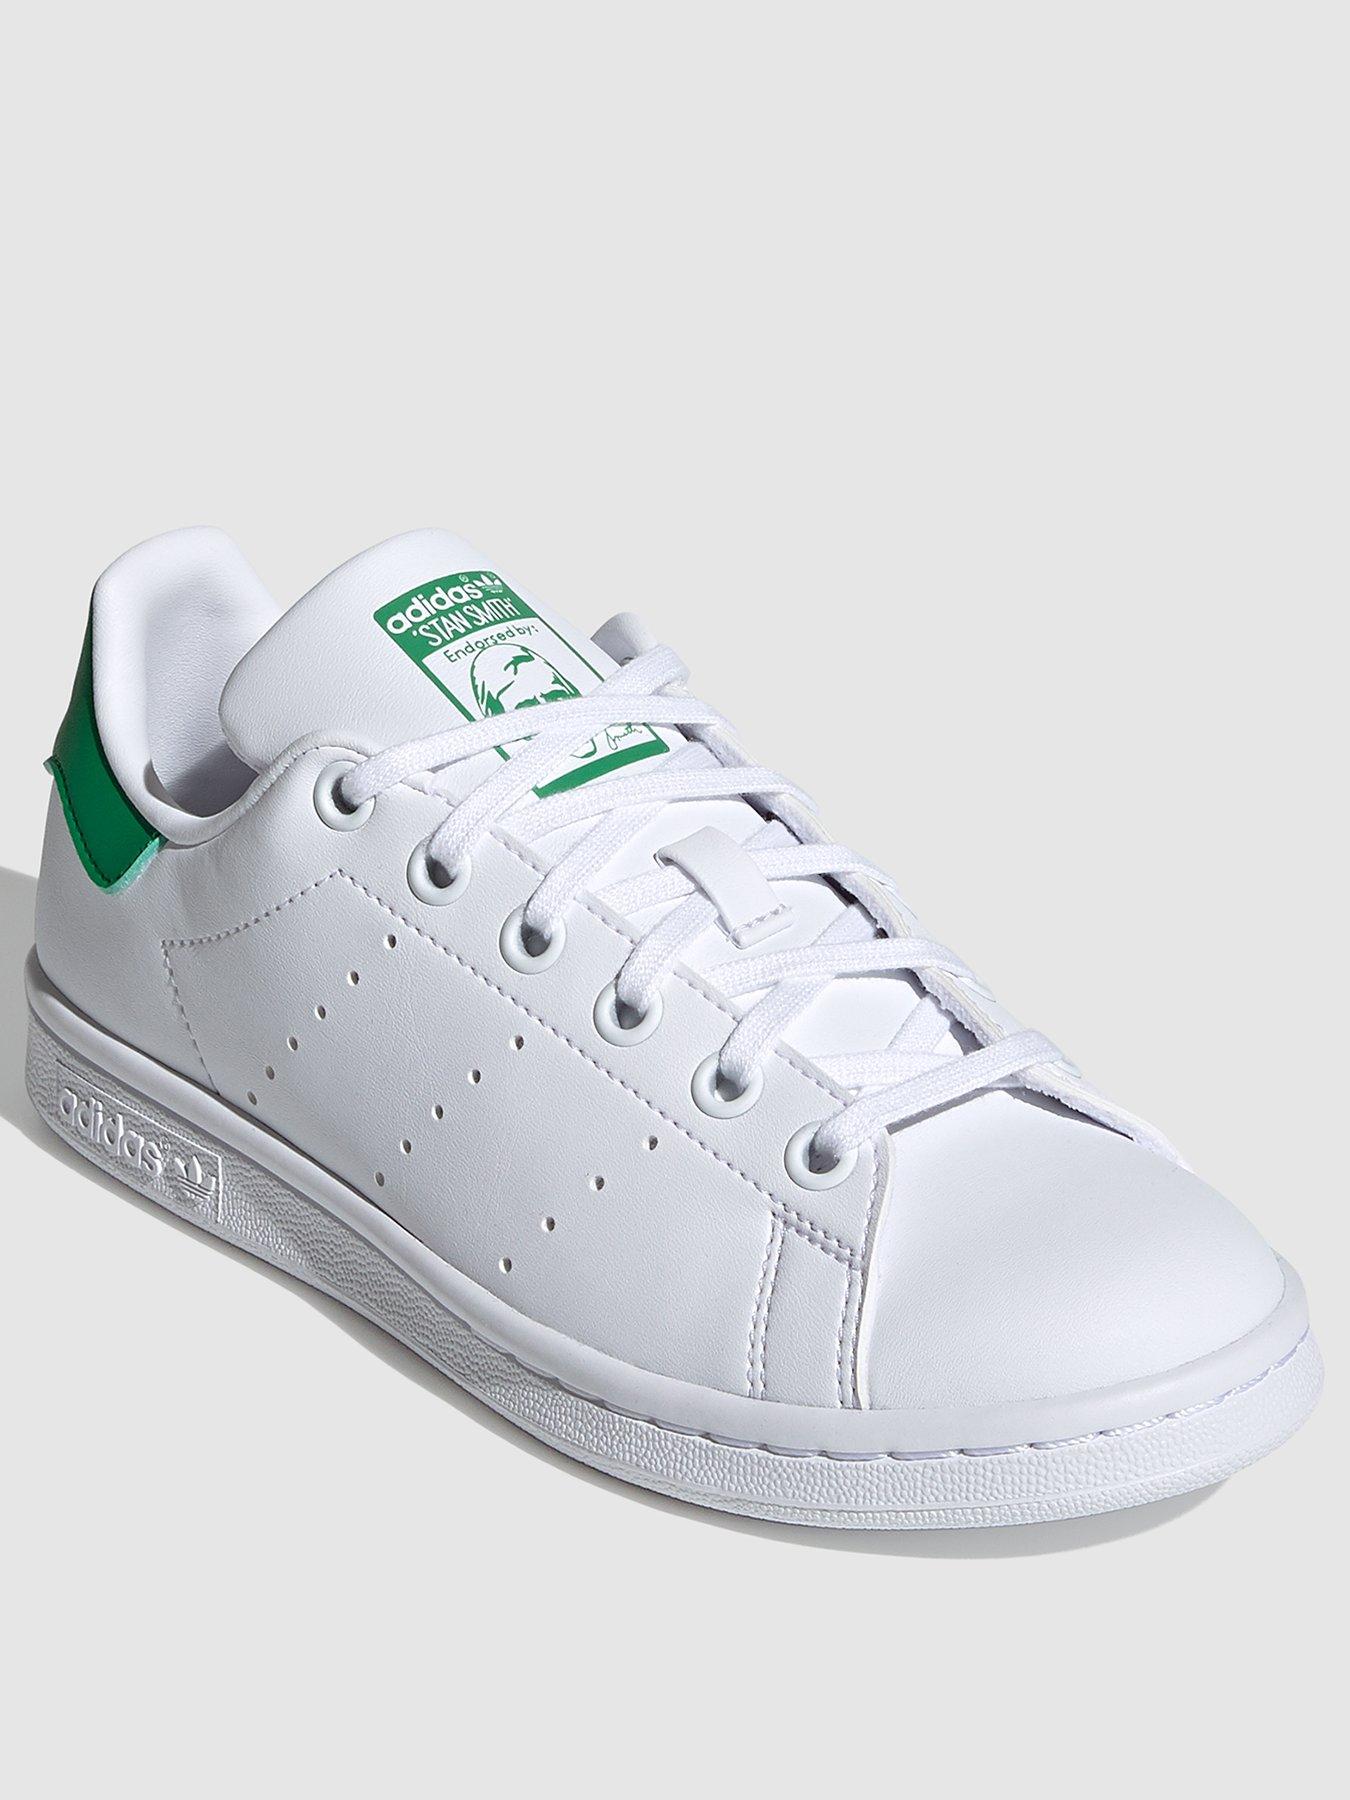 size 5 stan smith trainers